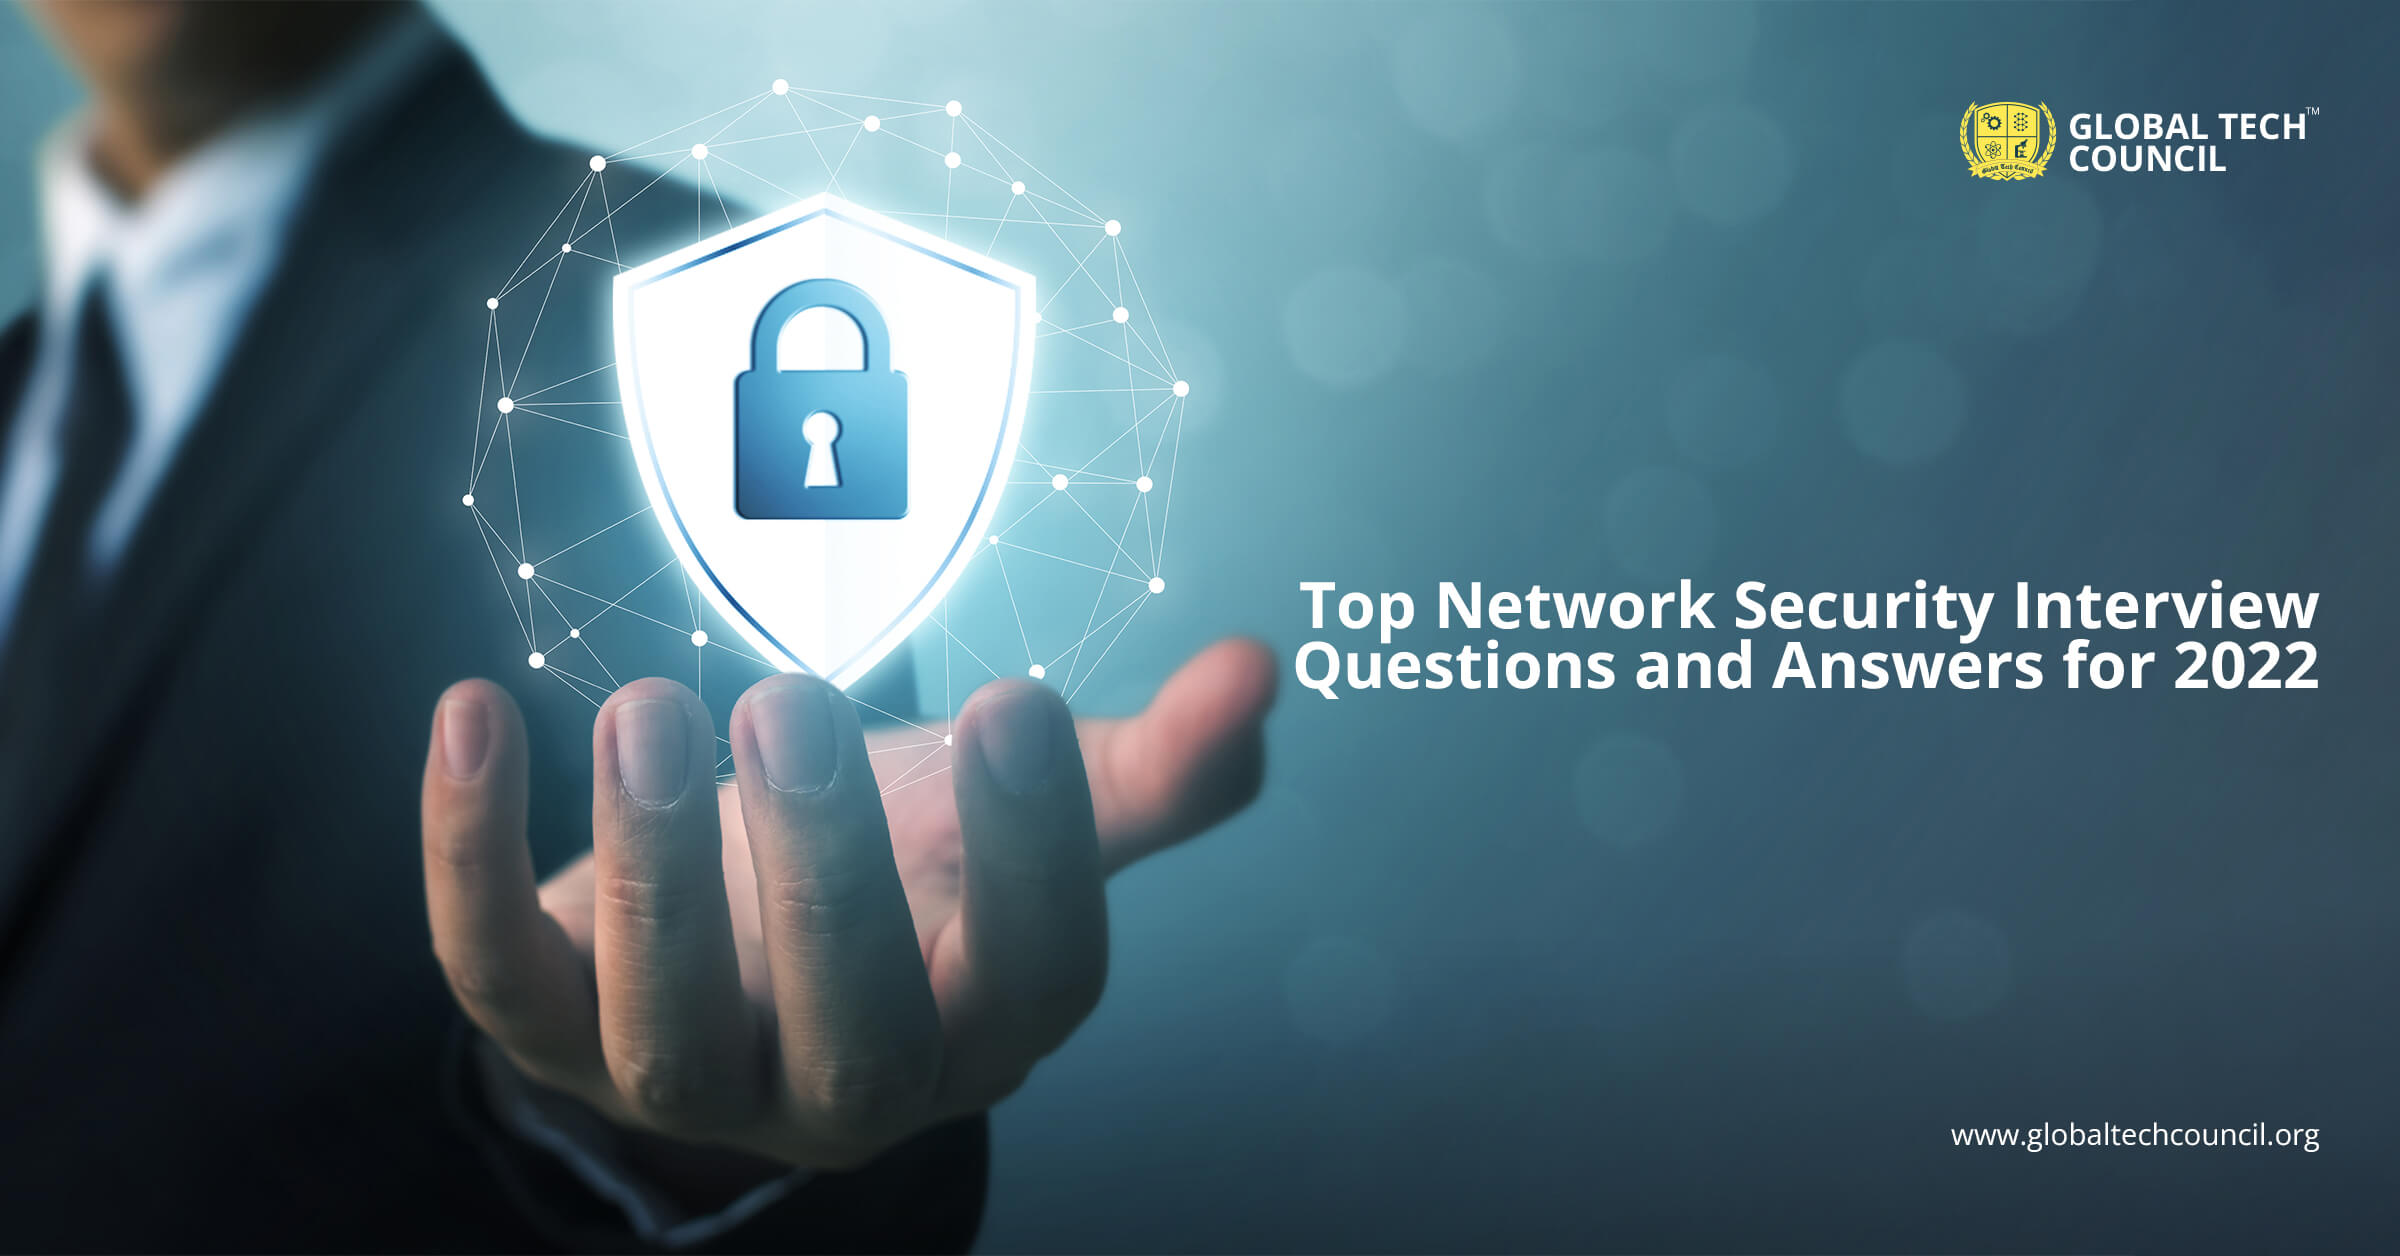 Top Network Security Interview Questions and Answers for 2022